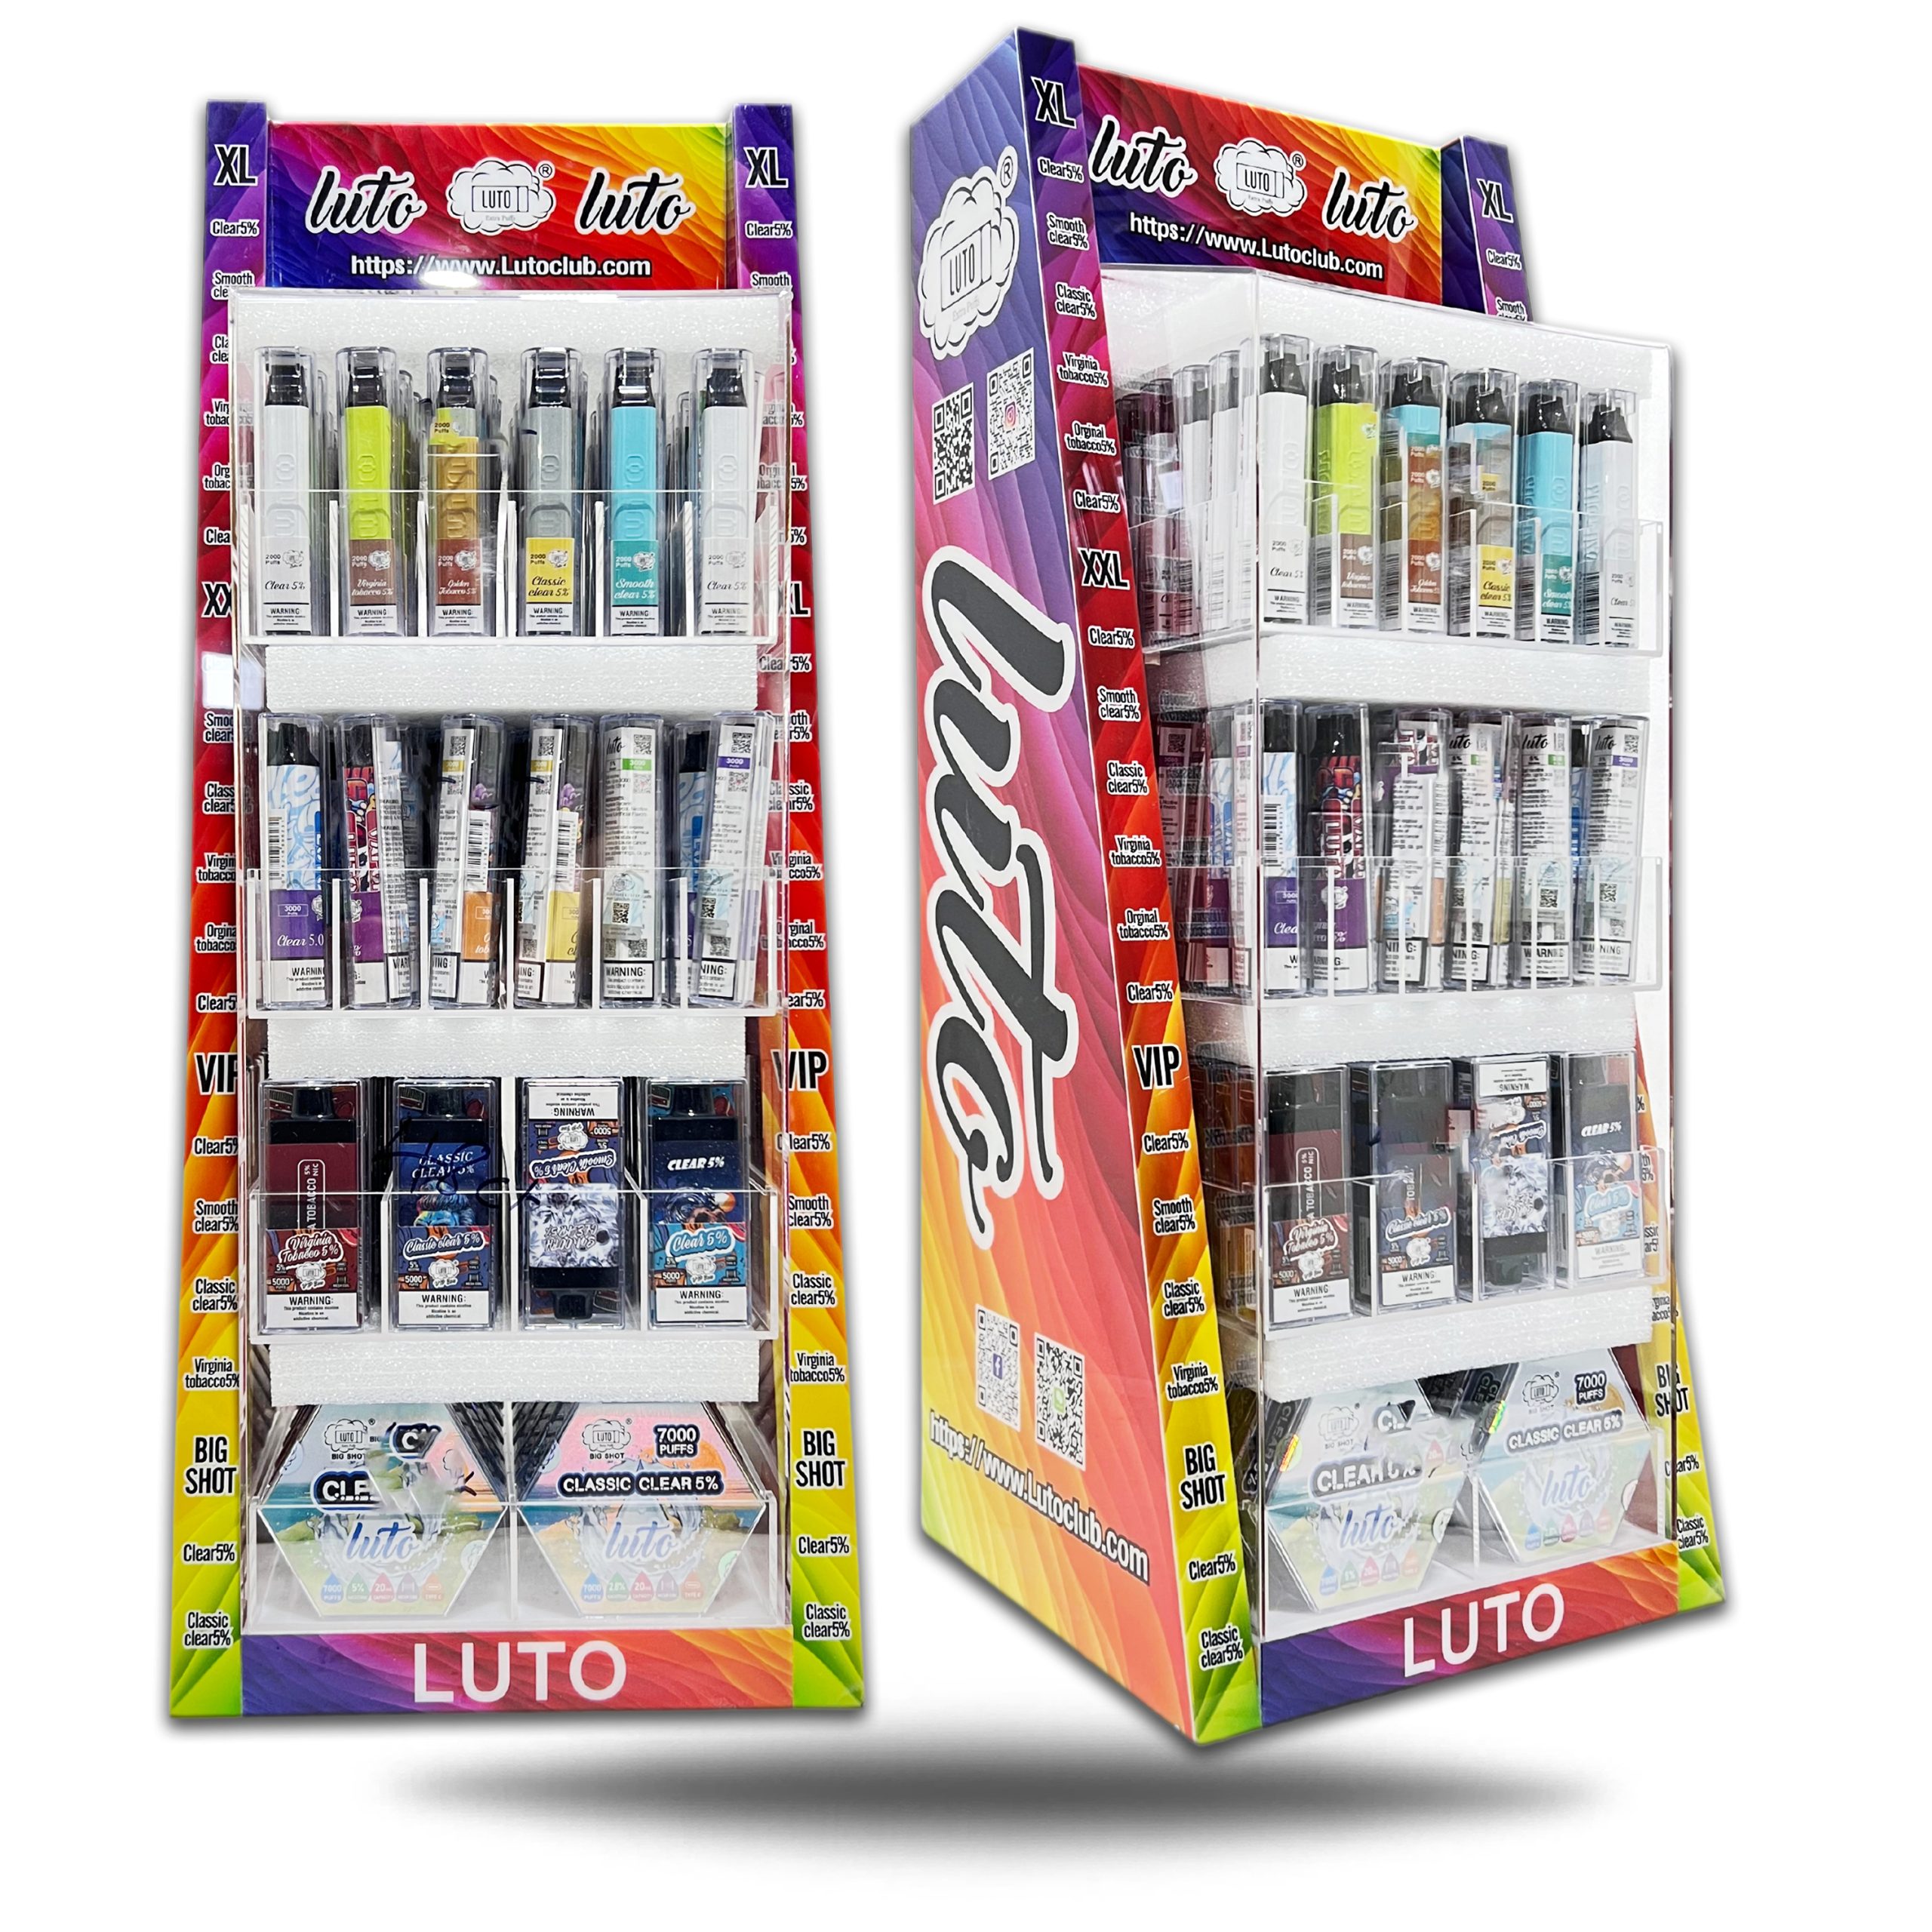 LUTO CLEAR and TOBACCO DISPLAY 5% XL 2000PF(60CT) -PRO XXL 3000PF(60CT)- VIP BOX 5000PF(48CT) - BIG SHOT 7000PF(18CT) -186CT DISPLAY